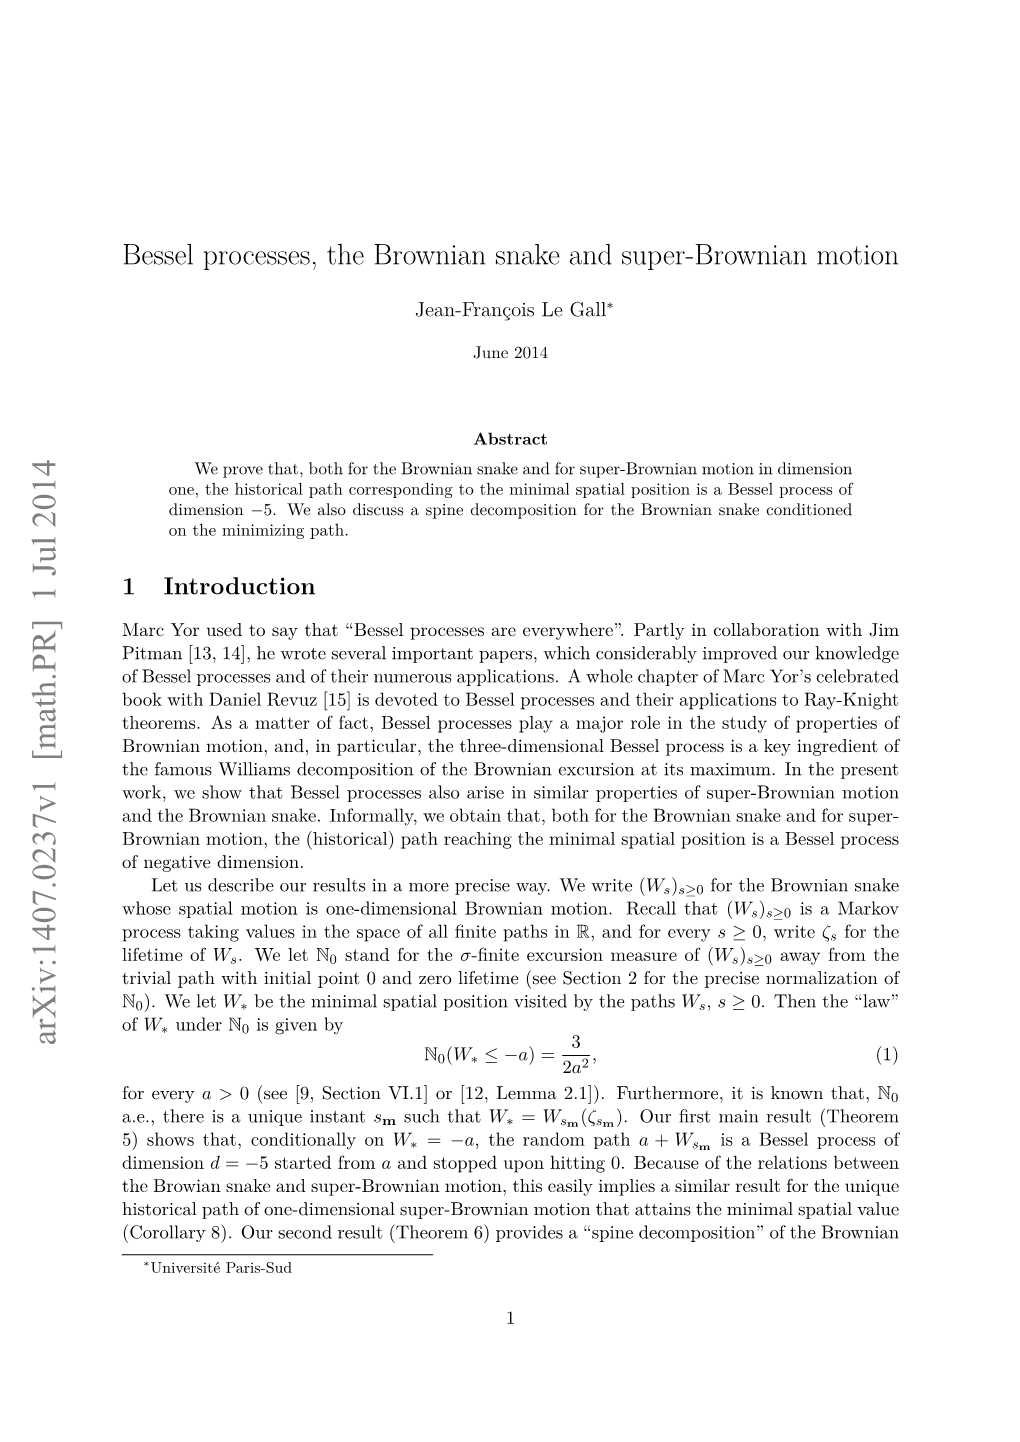 Bessel Processes, the Brownian Snake and Super-Brownian Motion